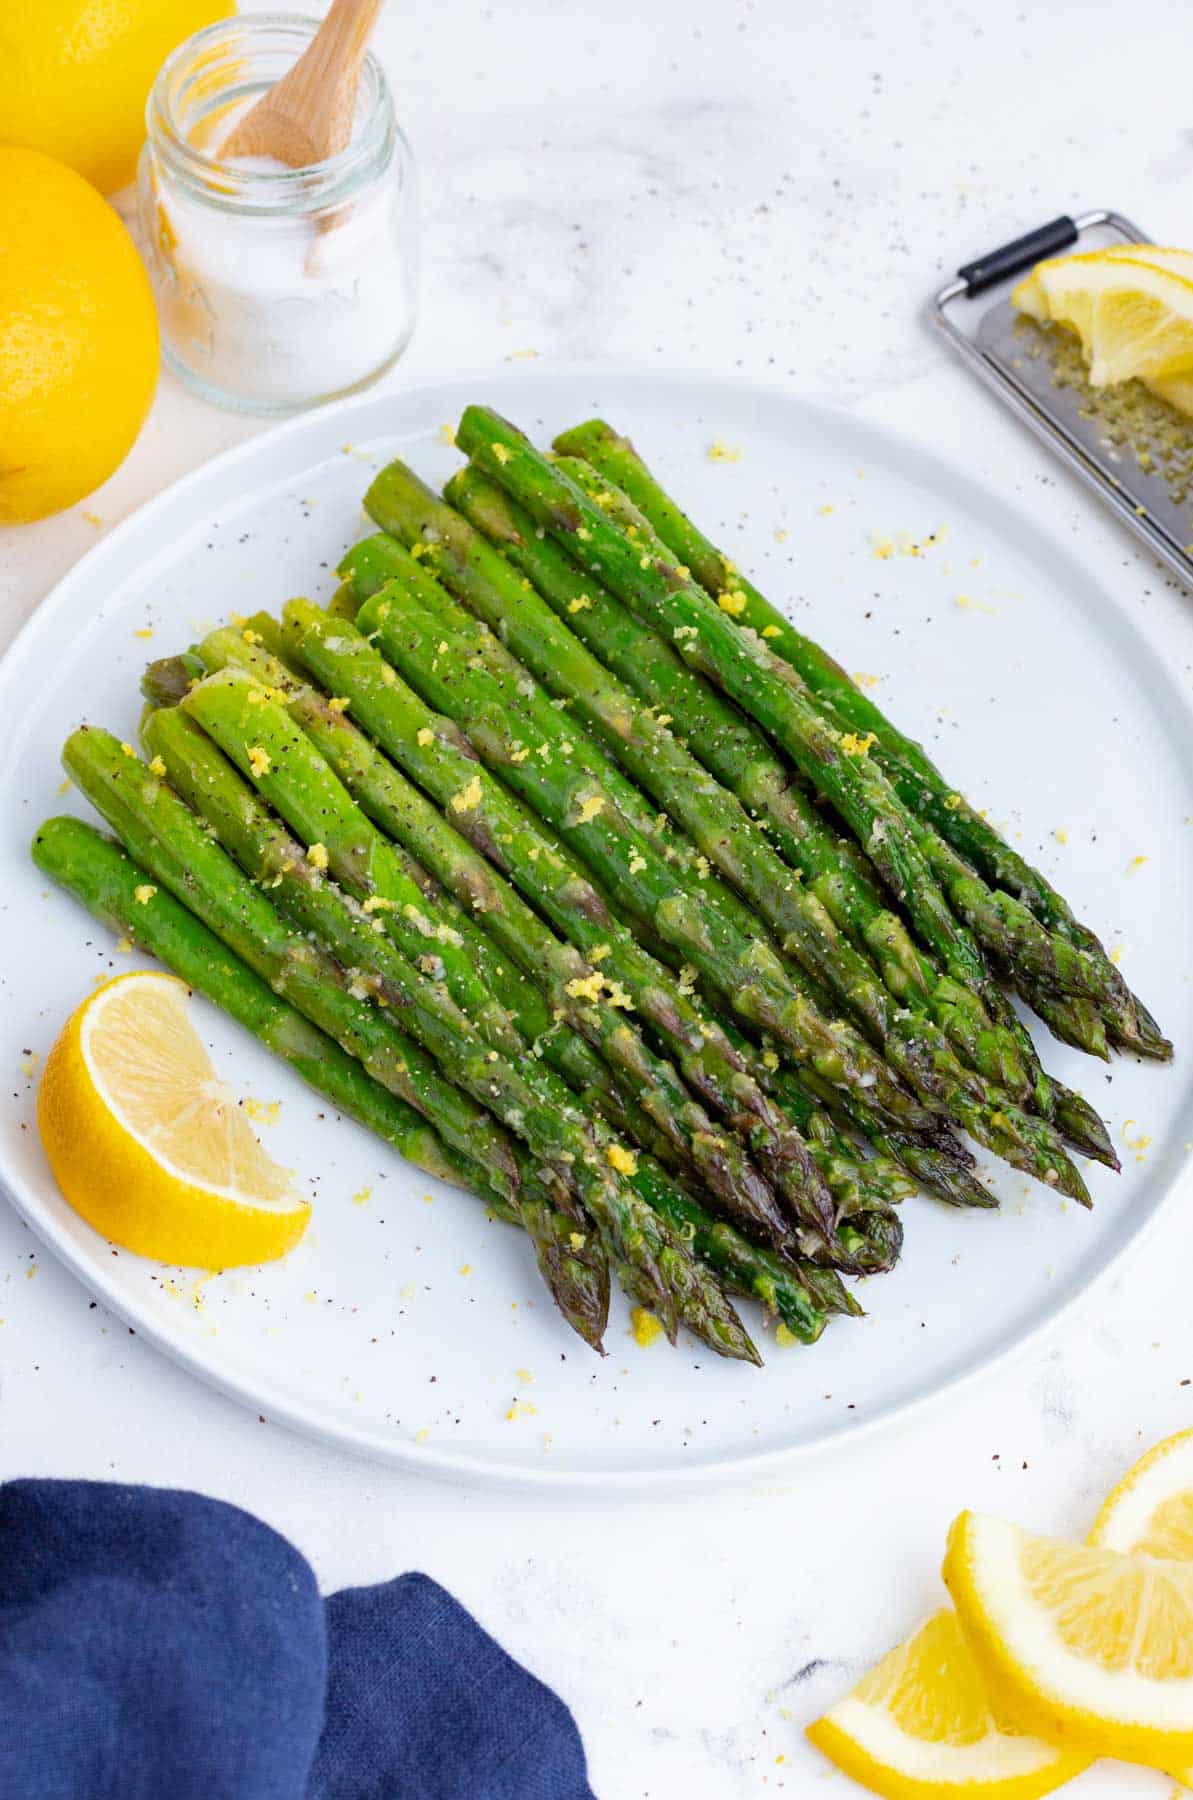 Green asparagus is full of flavor and nutrients.